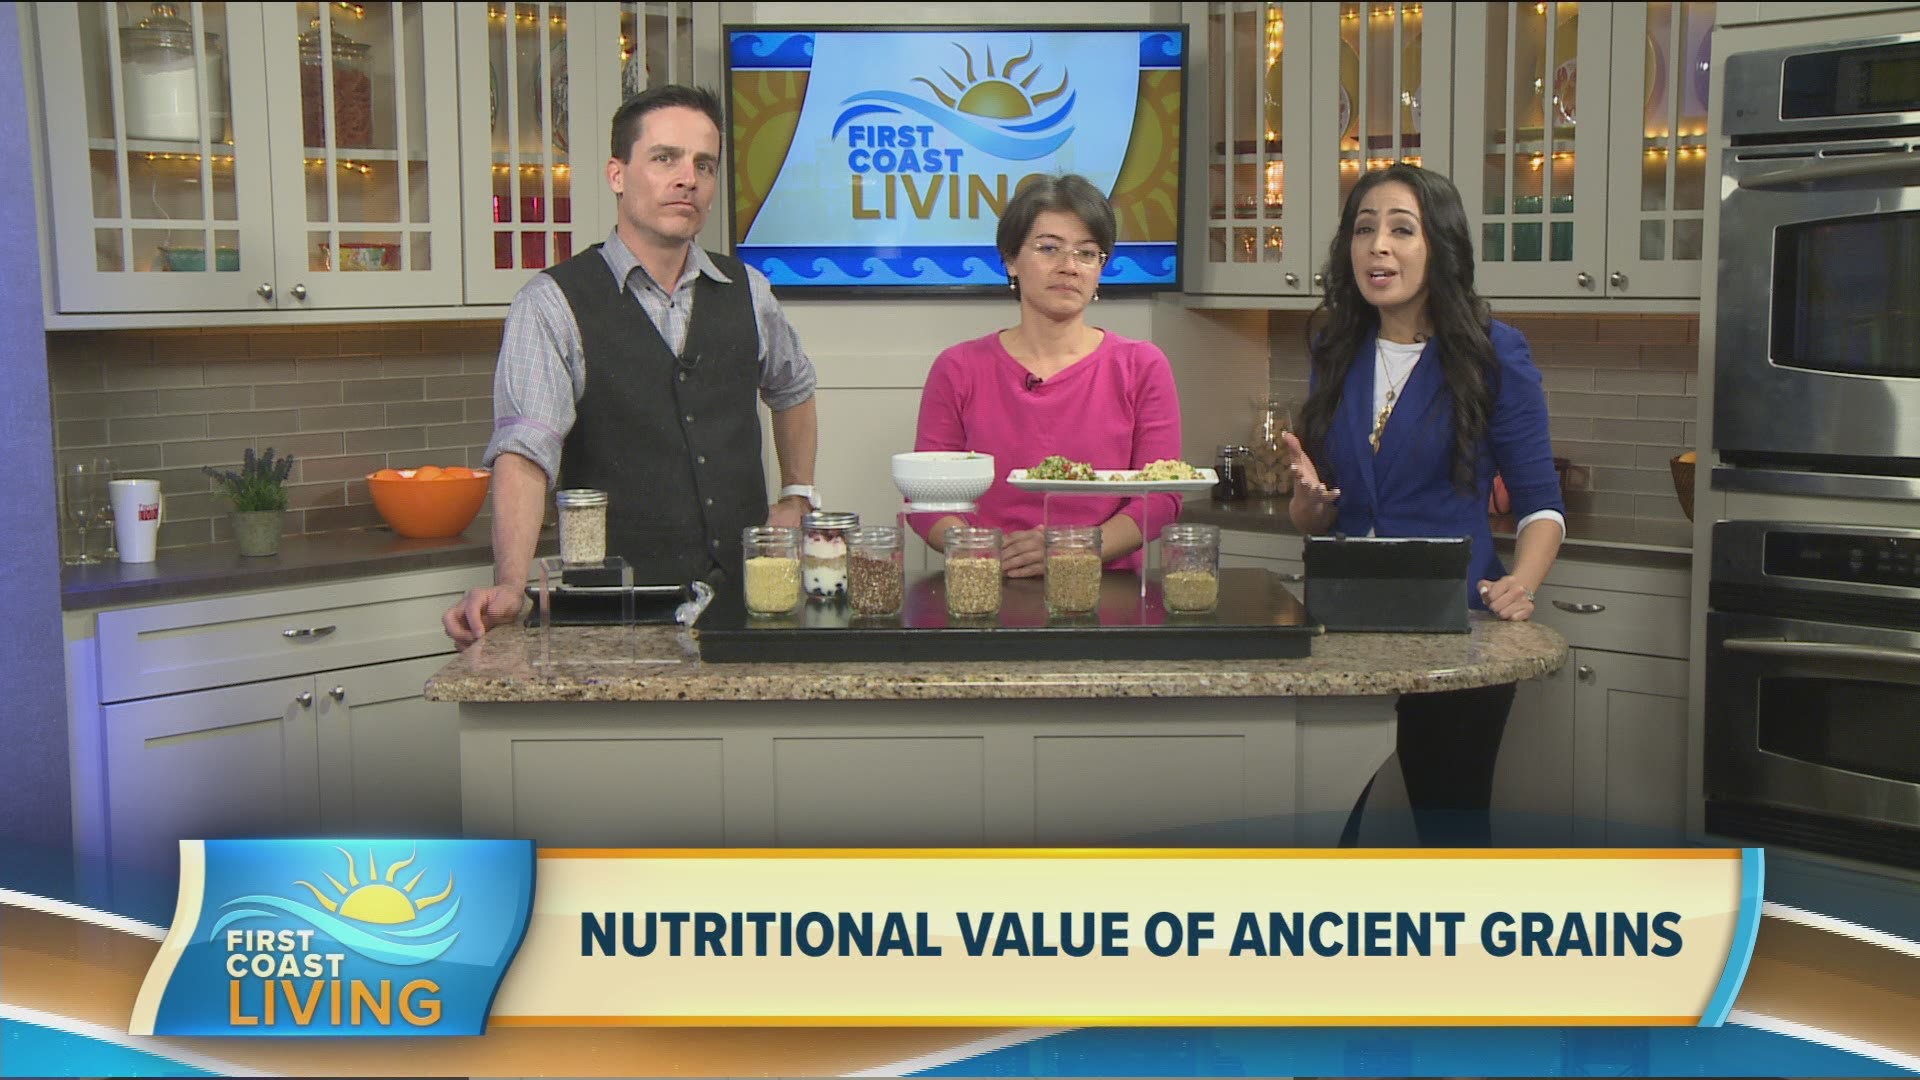 Andrea Arikawa is a registered dietitian and associate professor at University of North Florida. She shares the nutritional value of ancient grains.